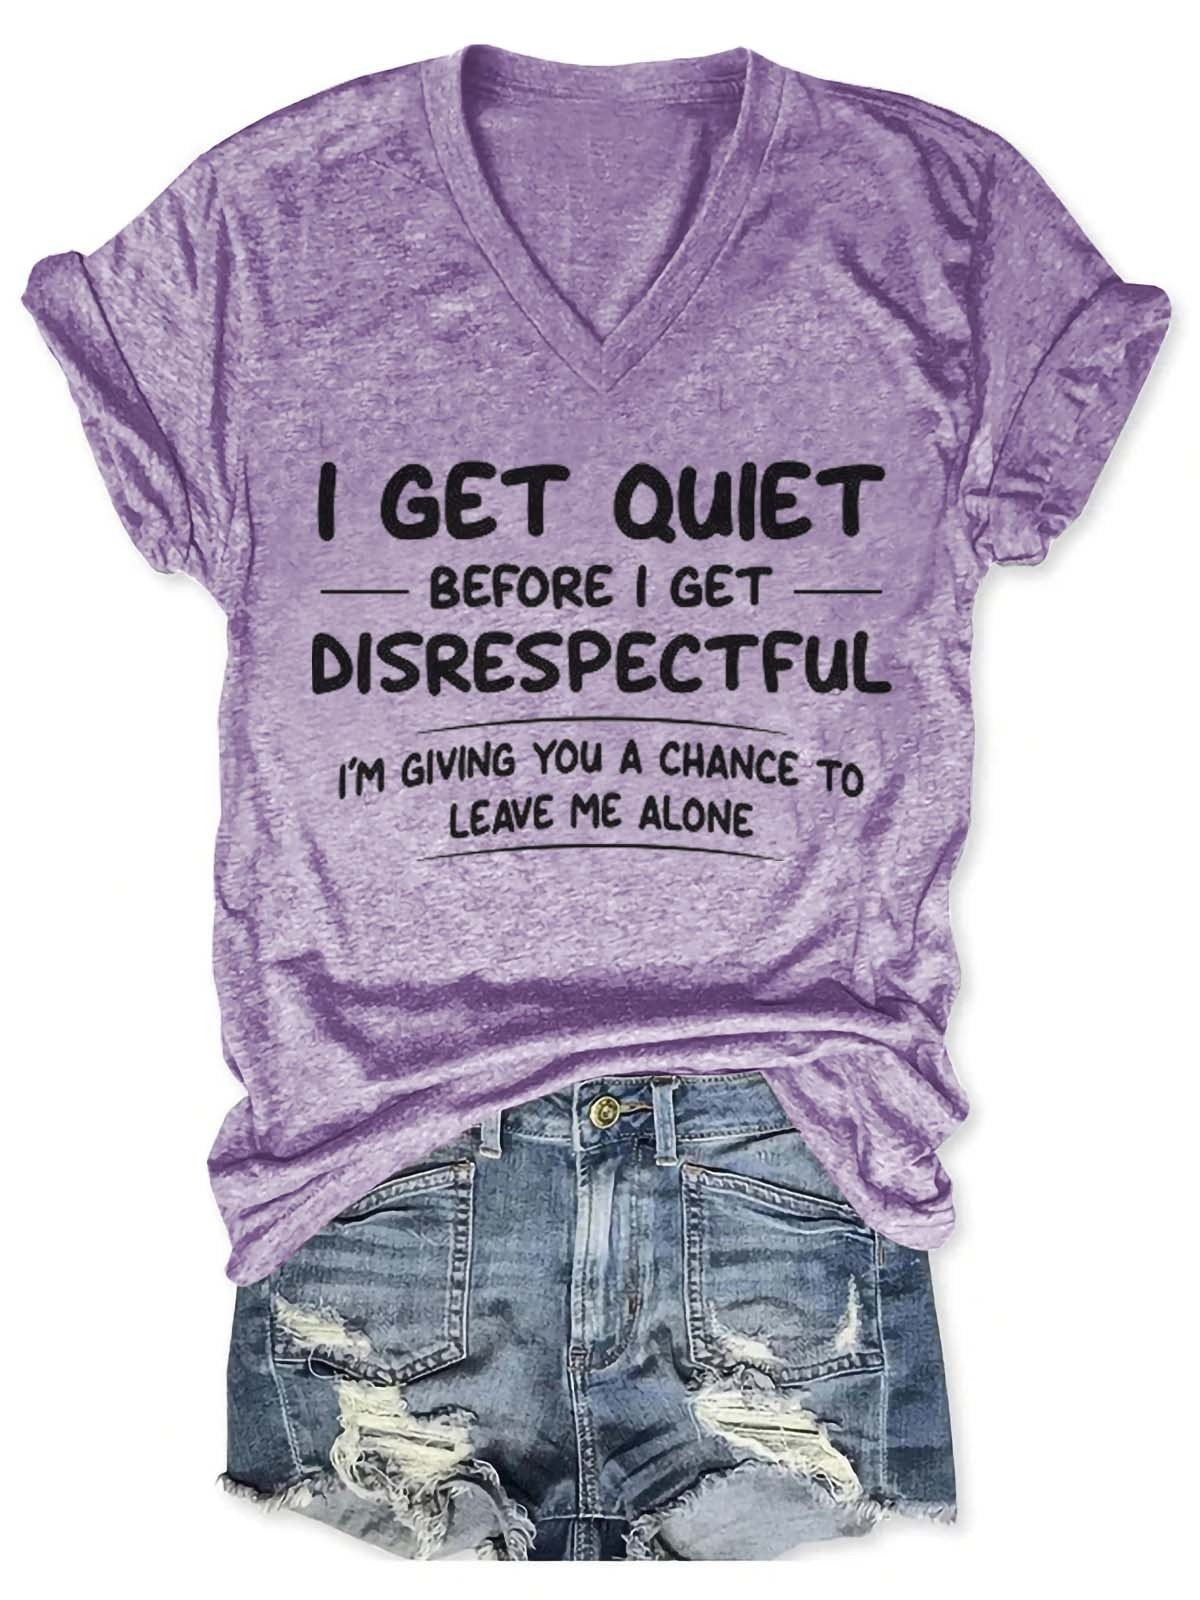 Women's I Get Quiet Before I Get Disrespectful I’m Giving You A Chance To Leave Me Alone V-Neck T-Shirt - Outlets Forever